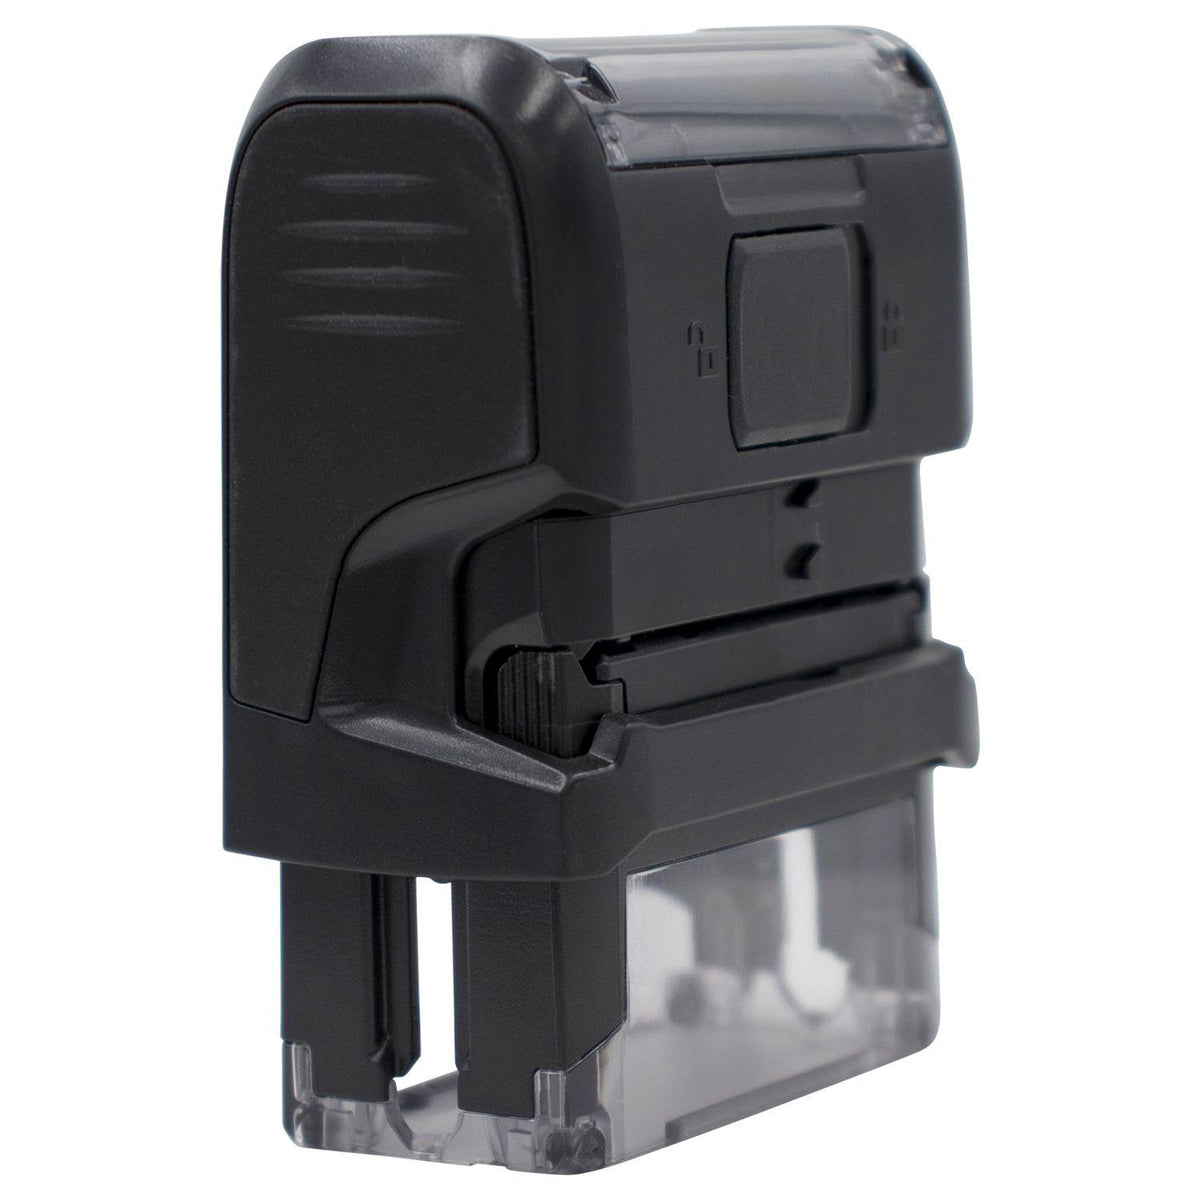 Self-Inking File with Envelope Stamp - Engineer Seal Stamps - Brand_Trodat, Impression Size_Small, Stamp Type_Self-Inking Stamp, Type of Use_General, Type of Use_Office